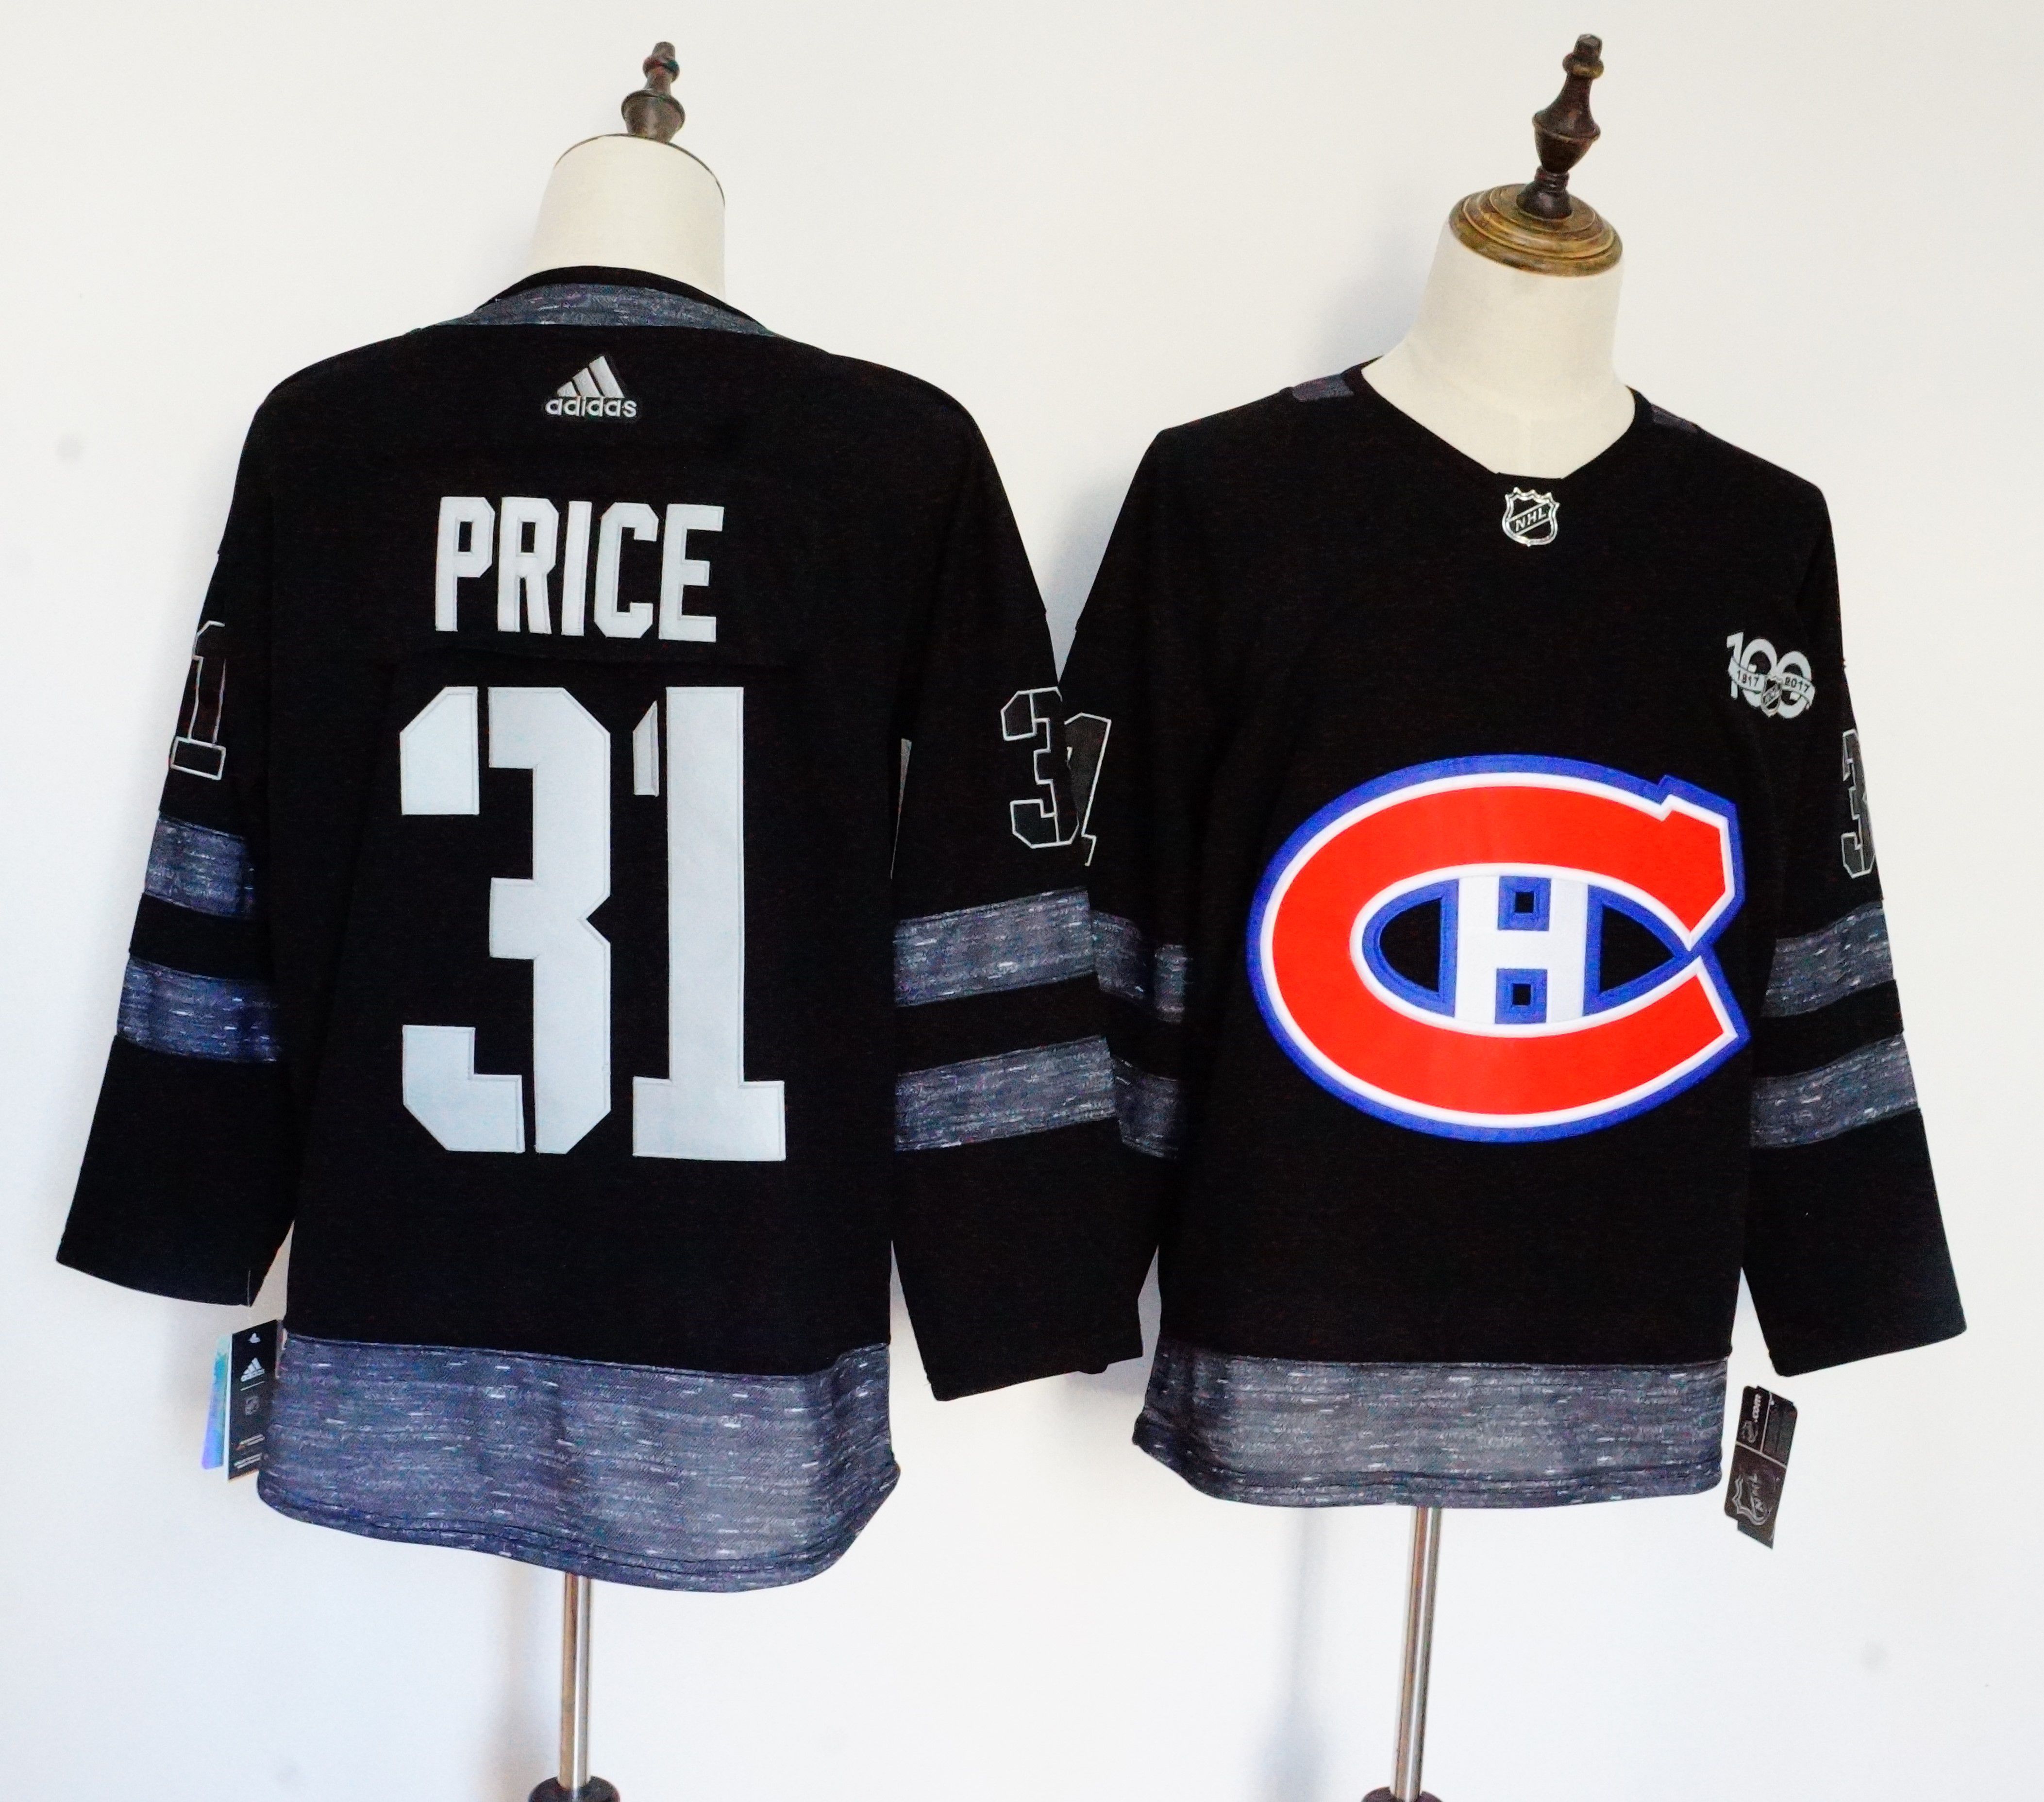 Men Montreal Canadiens #31 Price Black 100th Anniversary Stitched Adidas NHL Jerseys->montreal canadiens->NHL Jersey